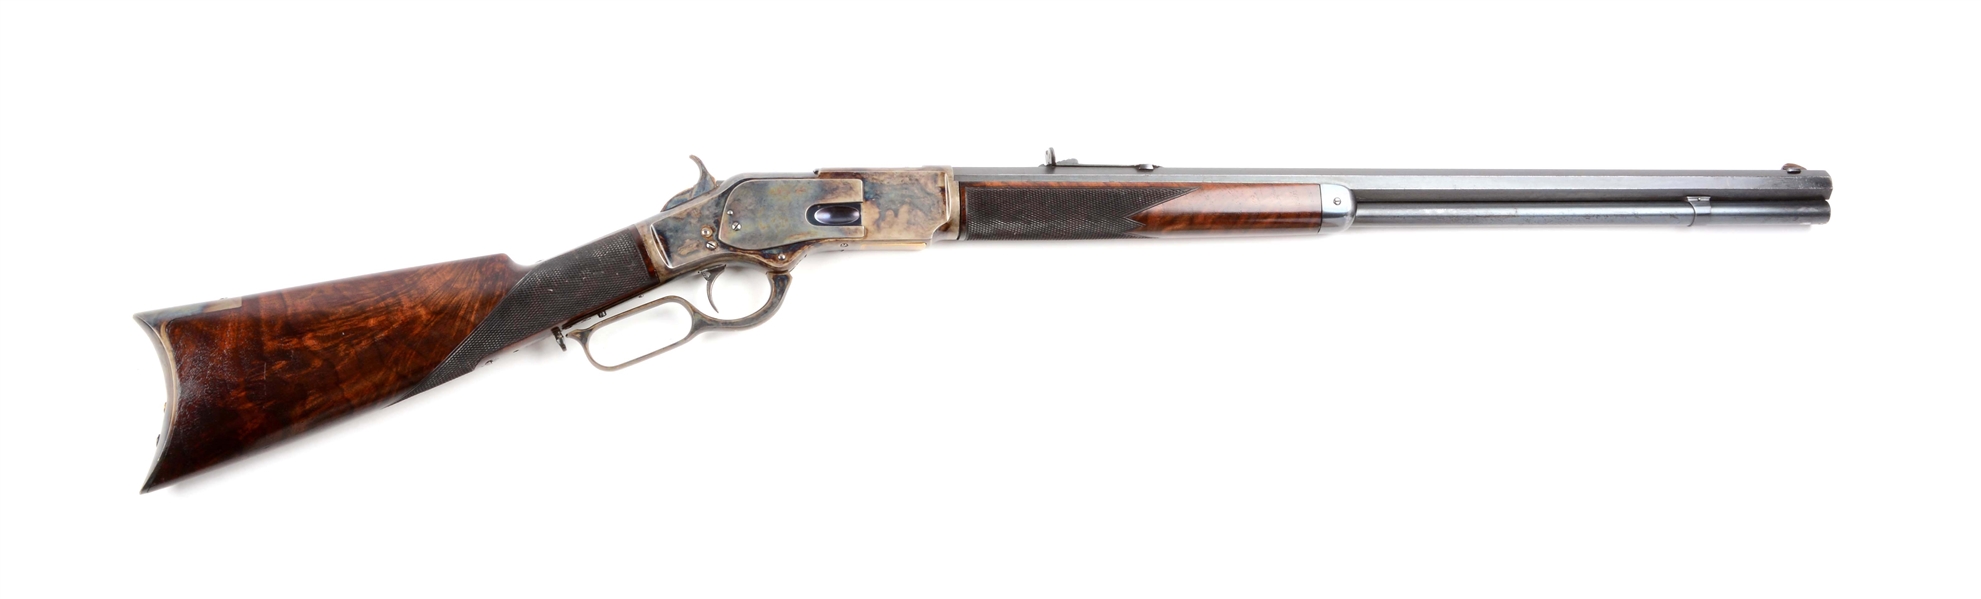 (A) NEAR NEW WINCHESTER MODEL 1873 1ST MODEL DELUXE LEVER ACTION SPORTING RIFLE (1875).